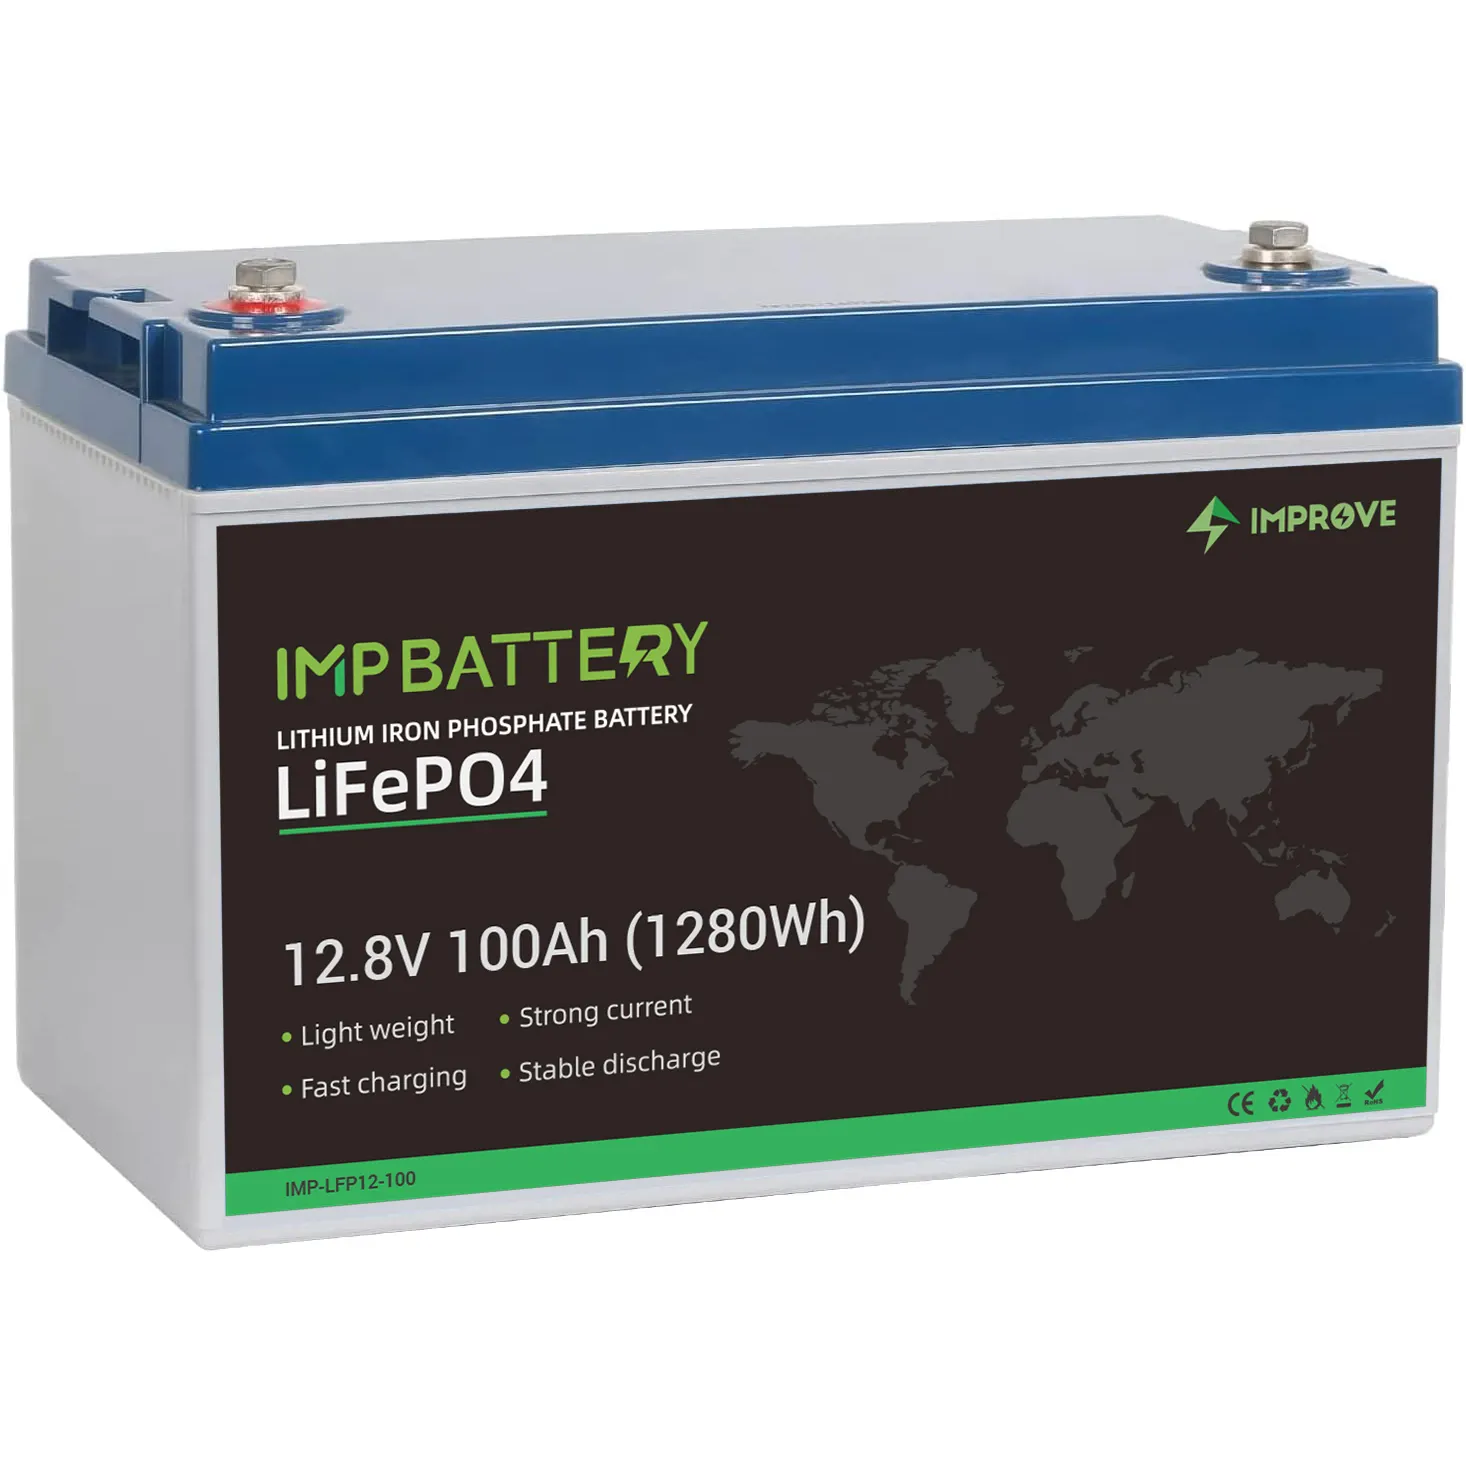 Rechargeable Deep Cycle Lithium ion battery 12V 100Ah LiFePO4 12.8V 150Ah 200Ah with Smart BMS for Boats RVs Camping Golf Carts